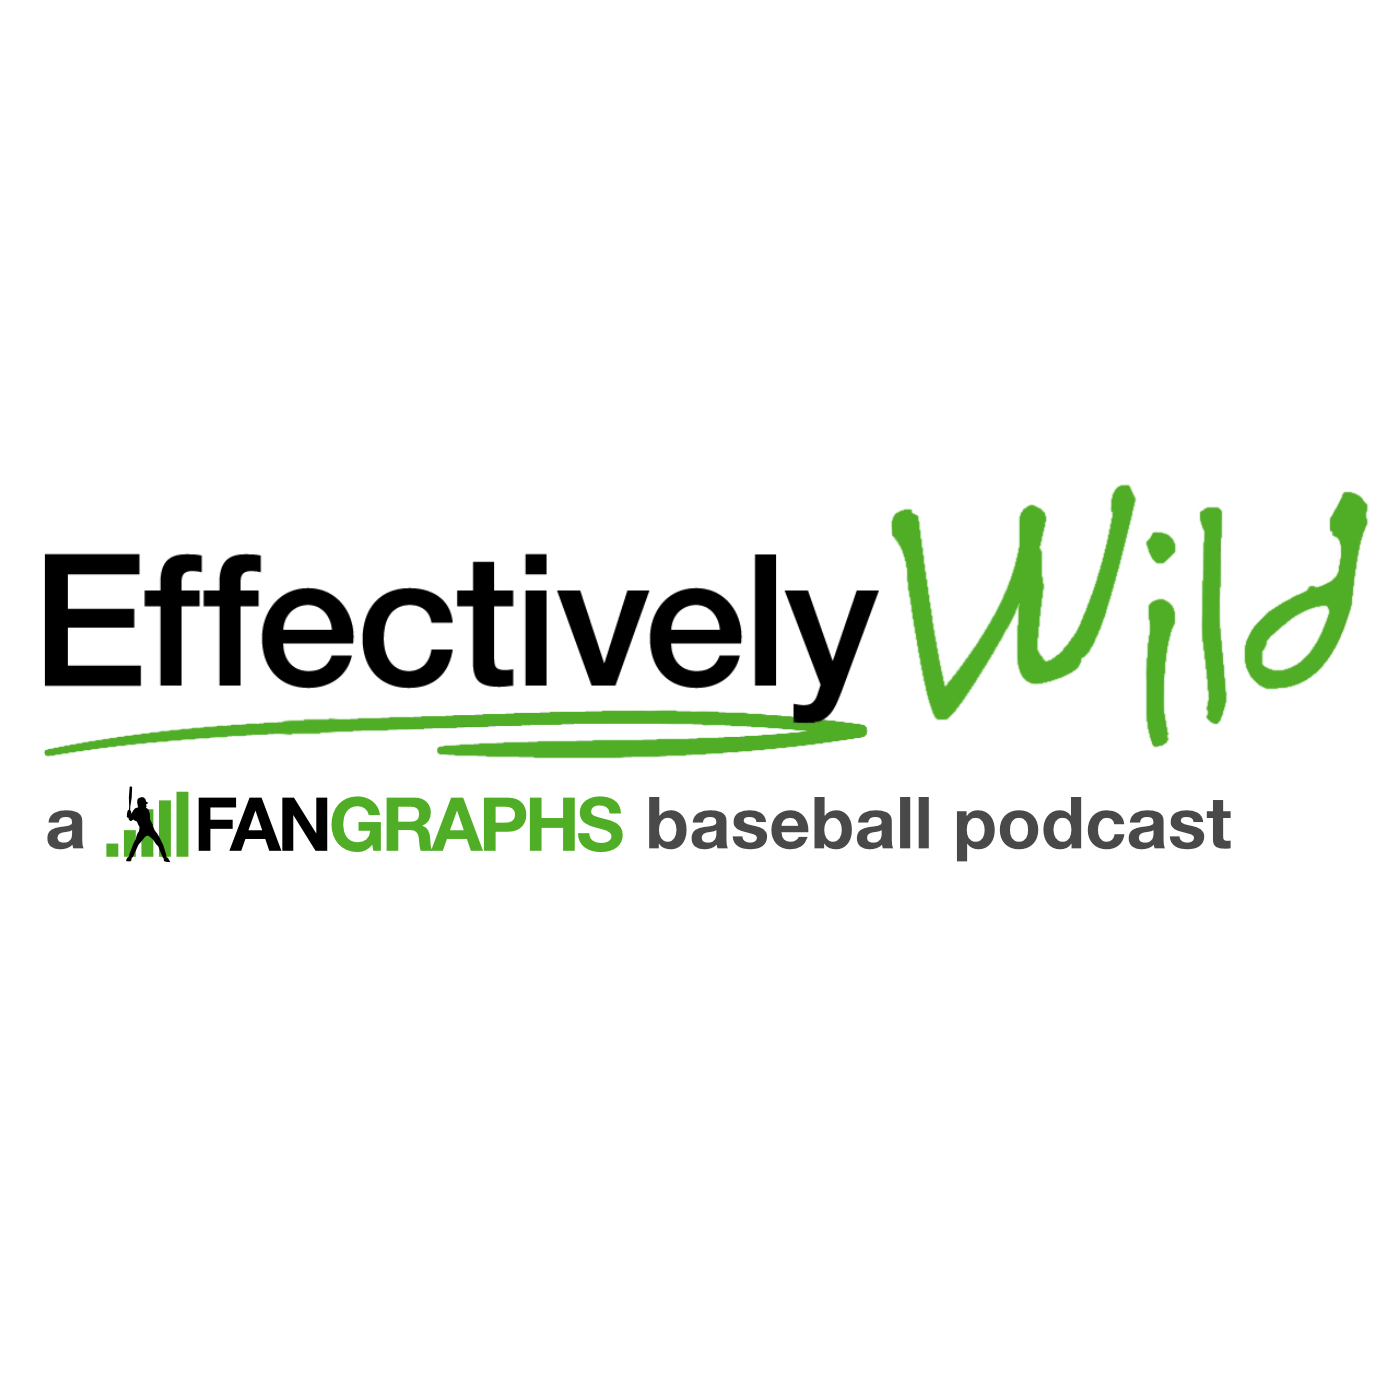 A highlight from Effectively Wild Episode 1879: Me and Julio Down By the Ballyard